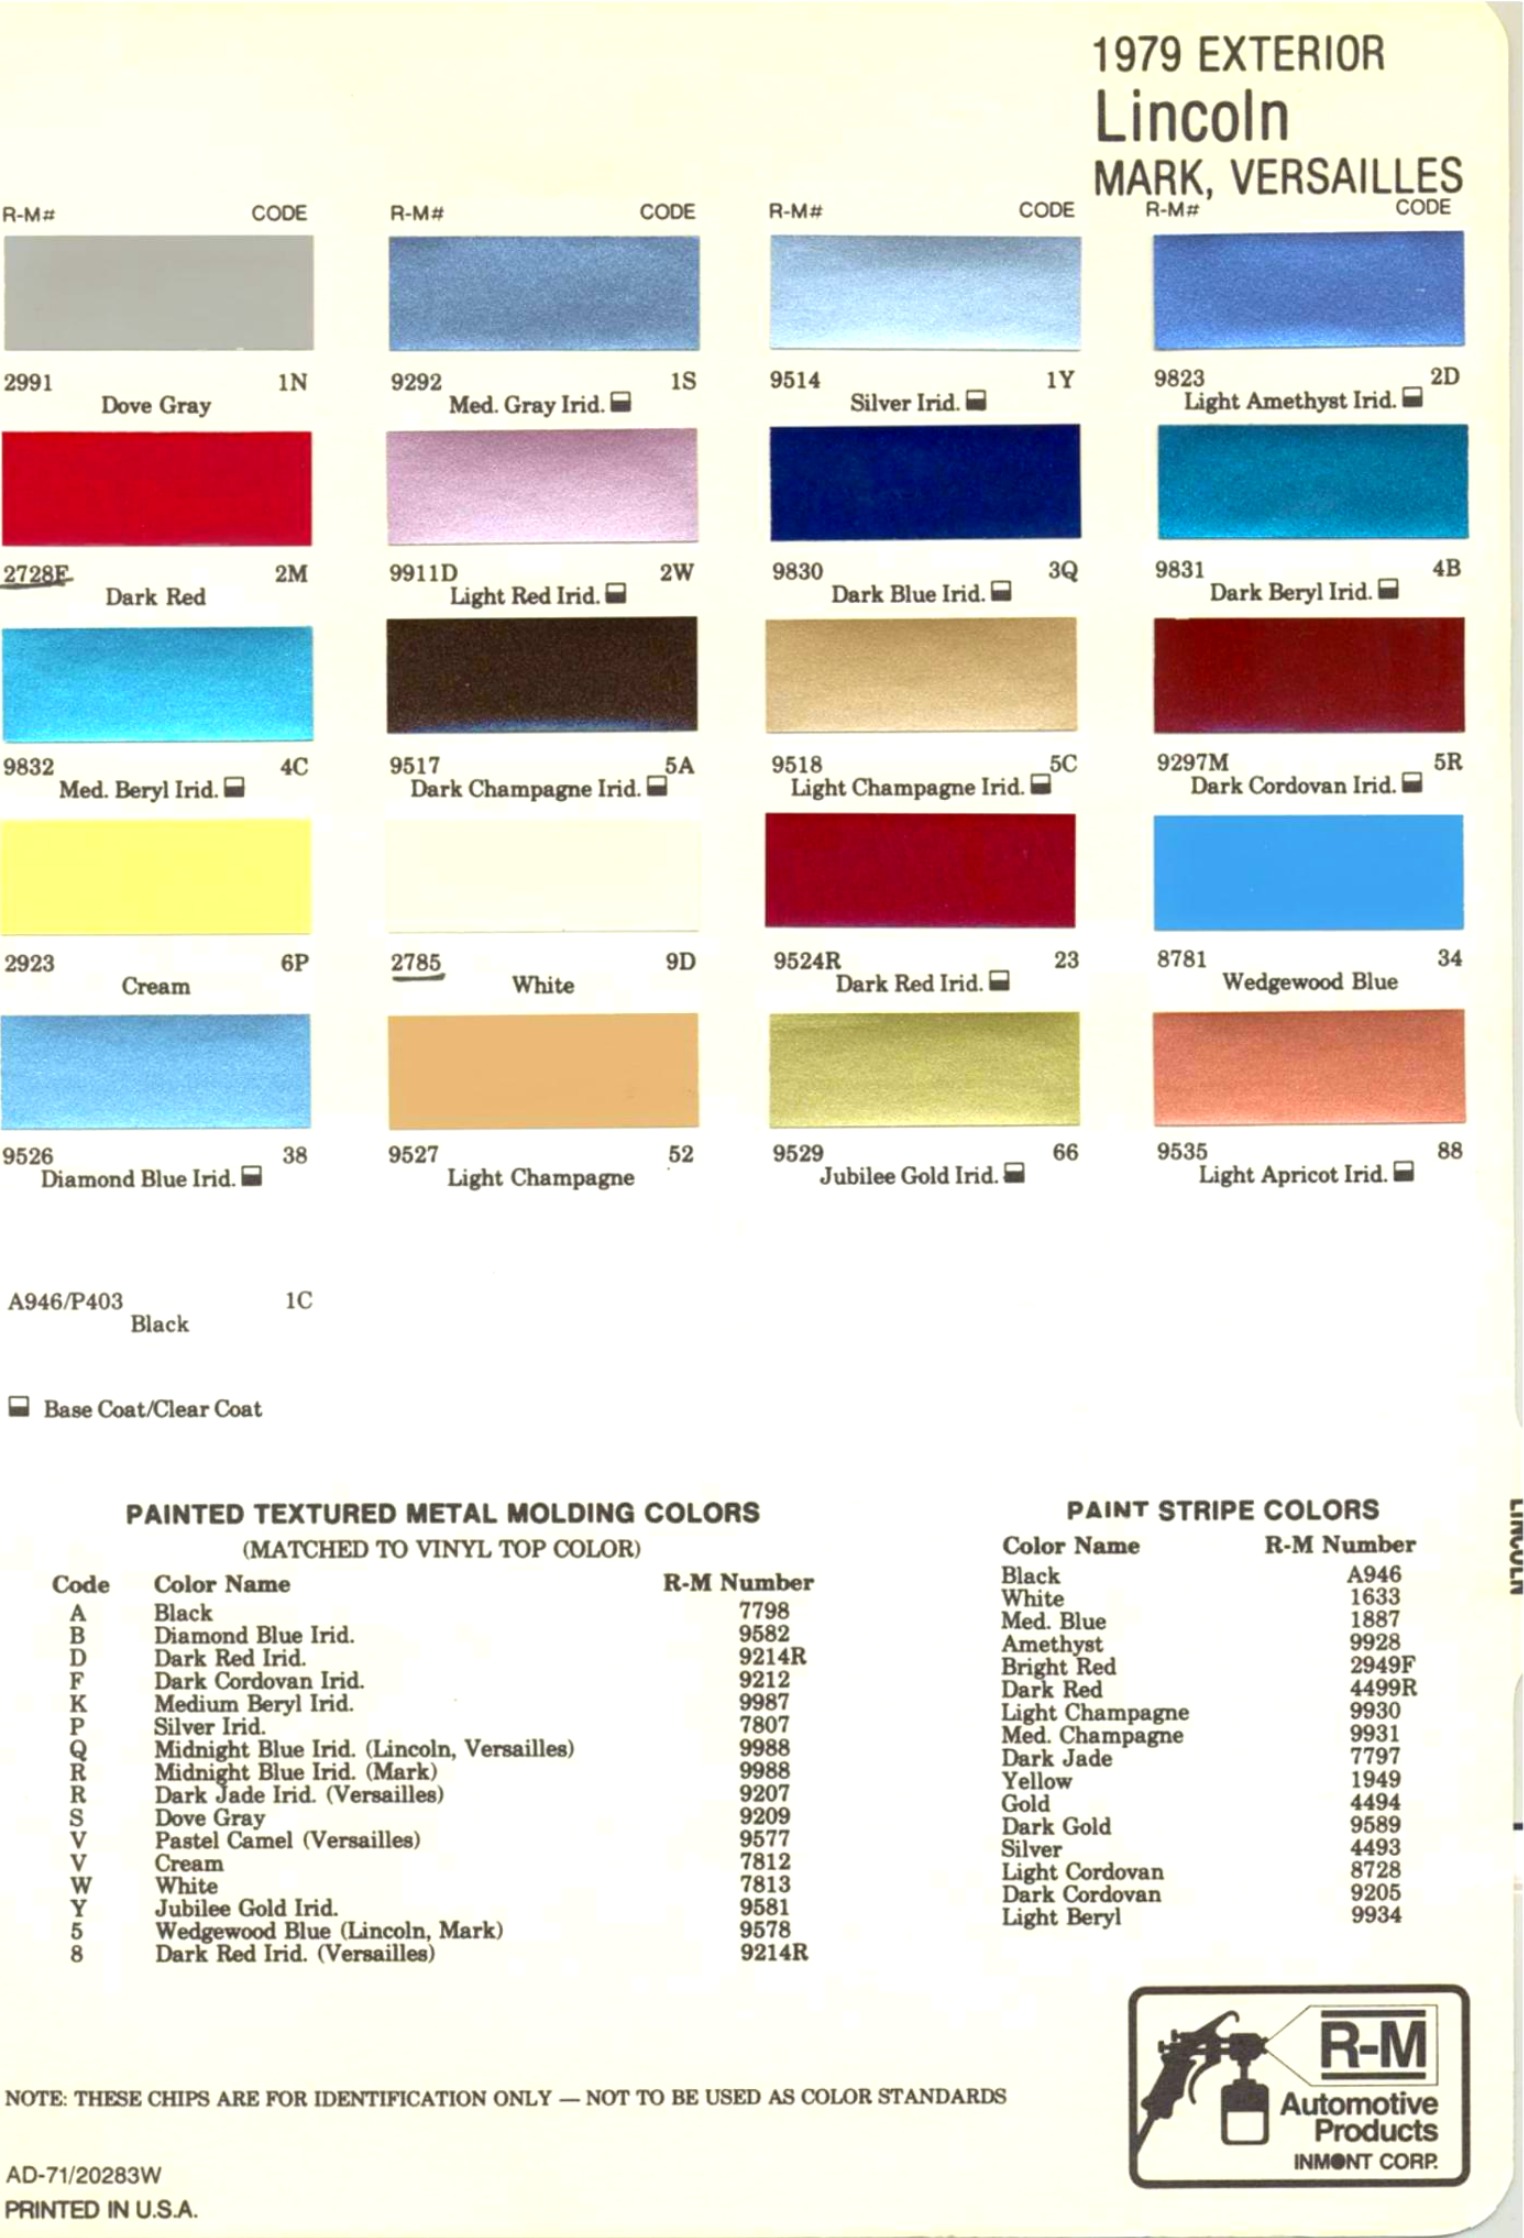 1979 Ford Motor Company paint codes, color swatches, and mixing stock numbers for repair of the vehicles